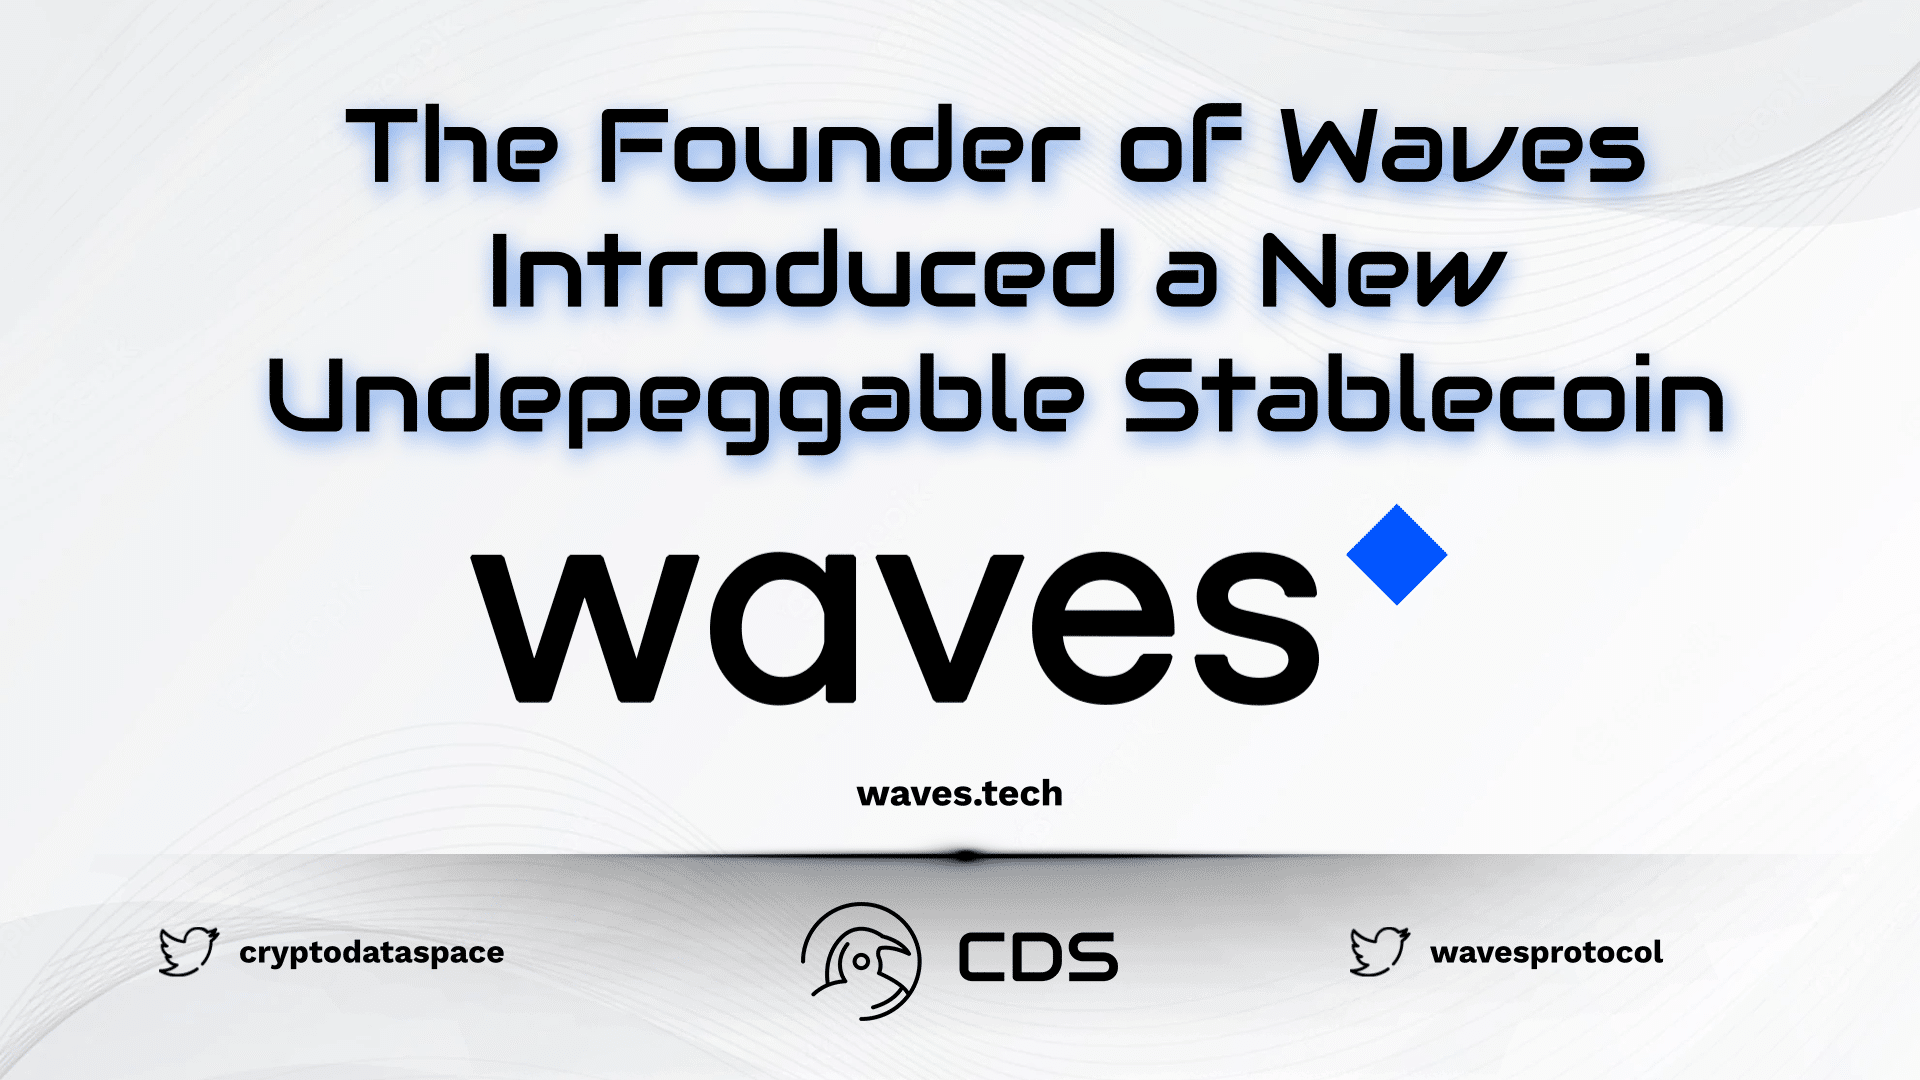 The Founder of Waves Introduced a New Undepeggable Stablecoin